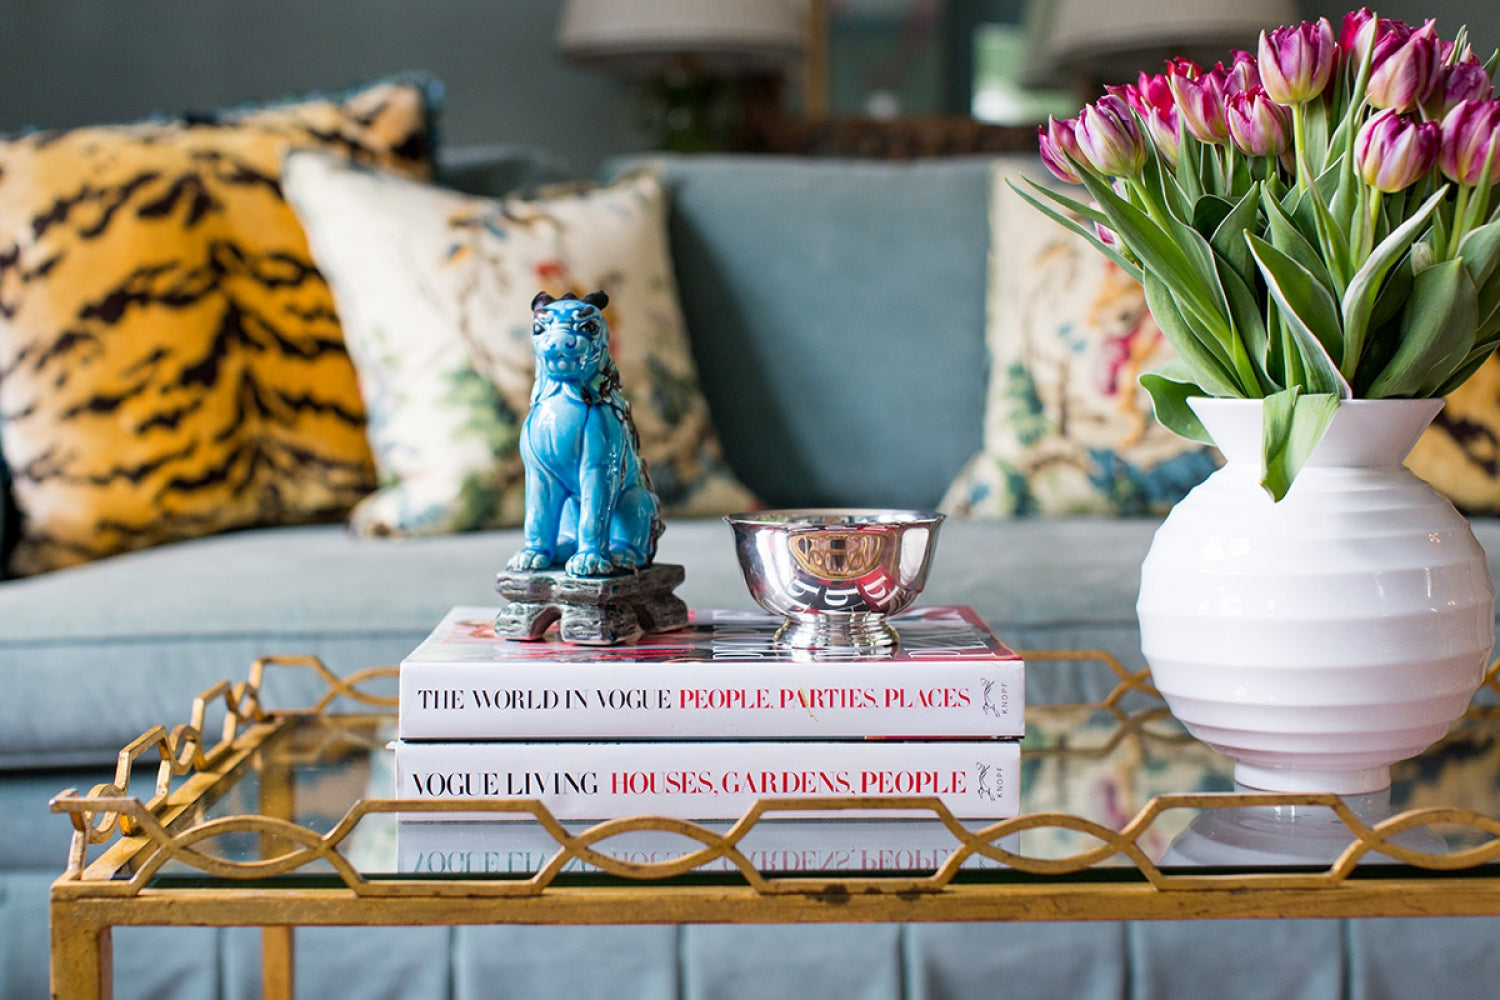 <a href="https://mallorymathison.com/" target="_blank">Mallory Mathison</a> knows her book covers and picked the perfect pairings for this pretty coffee table vignette (image from her website)